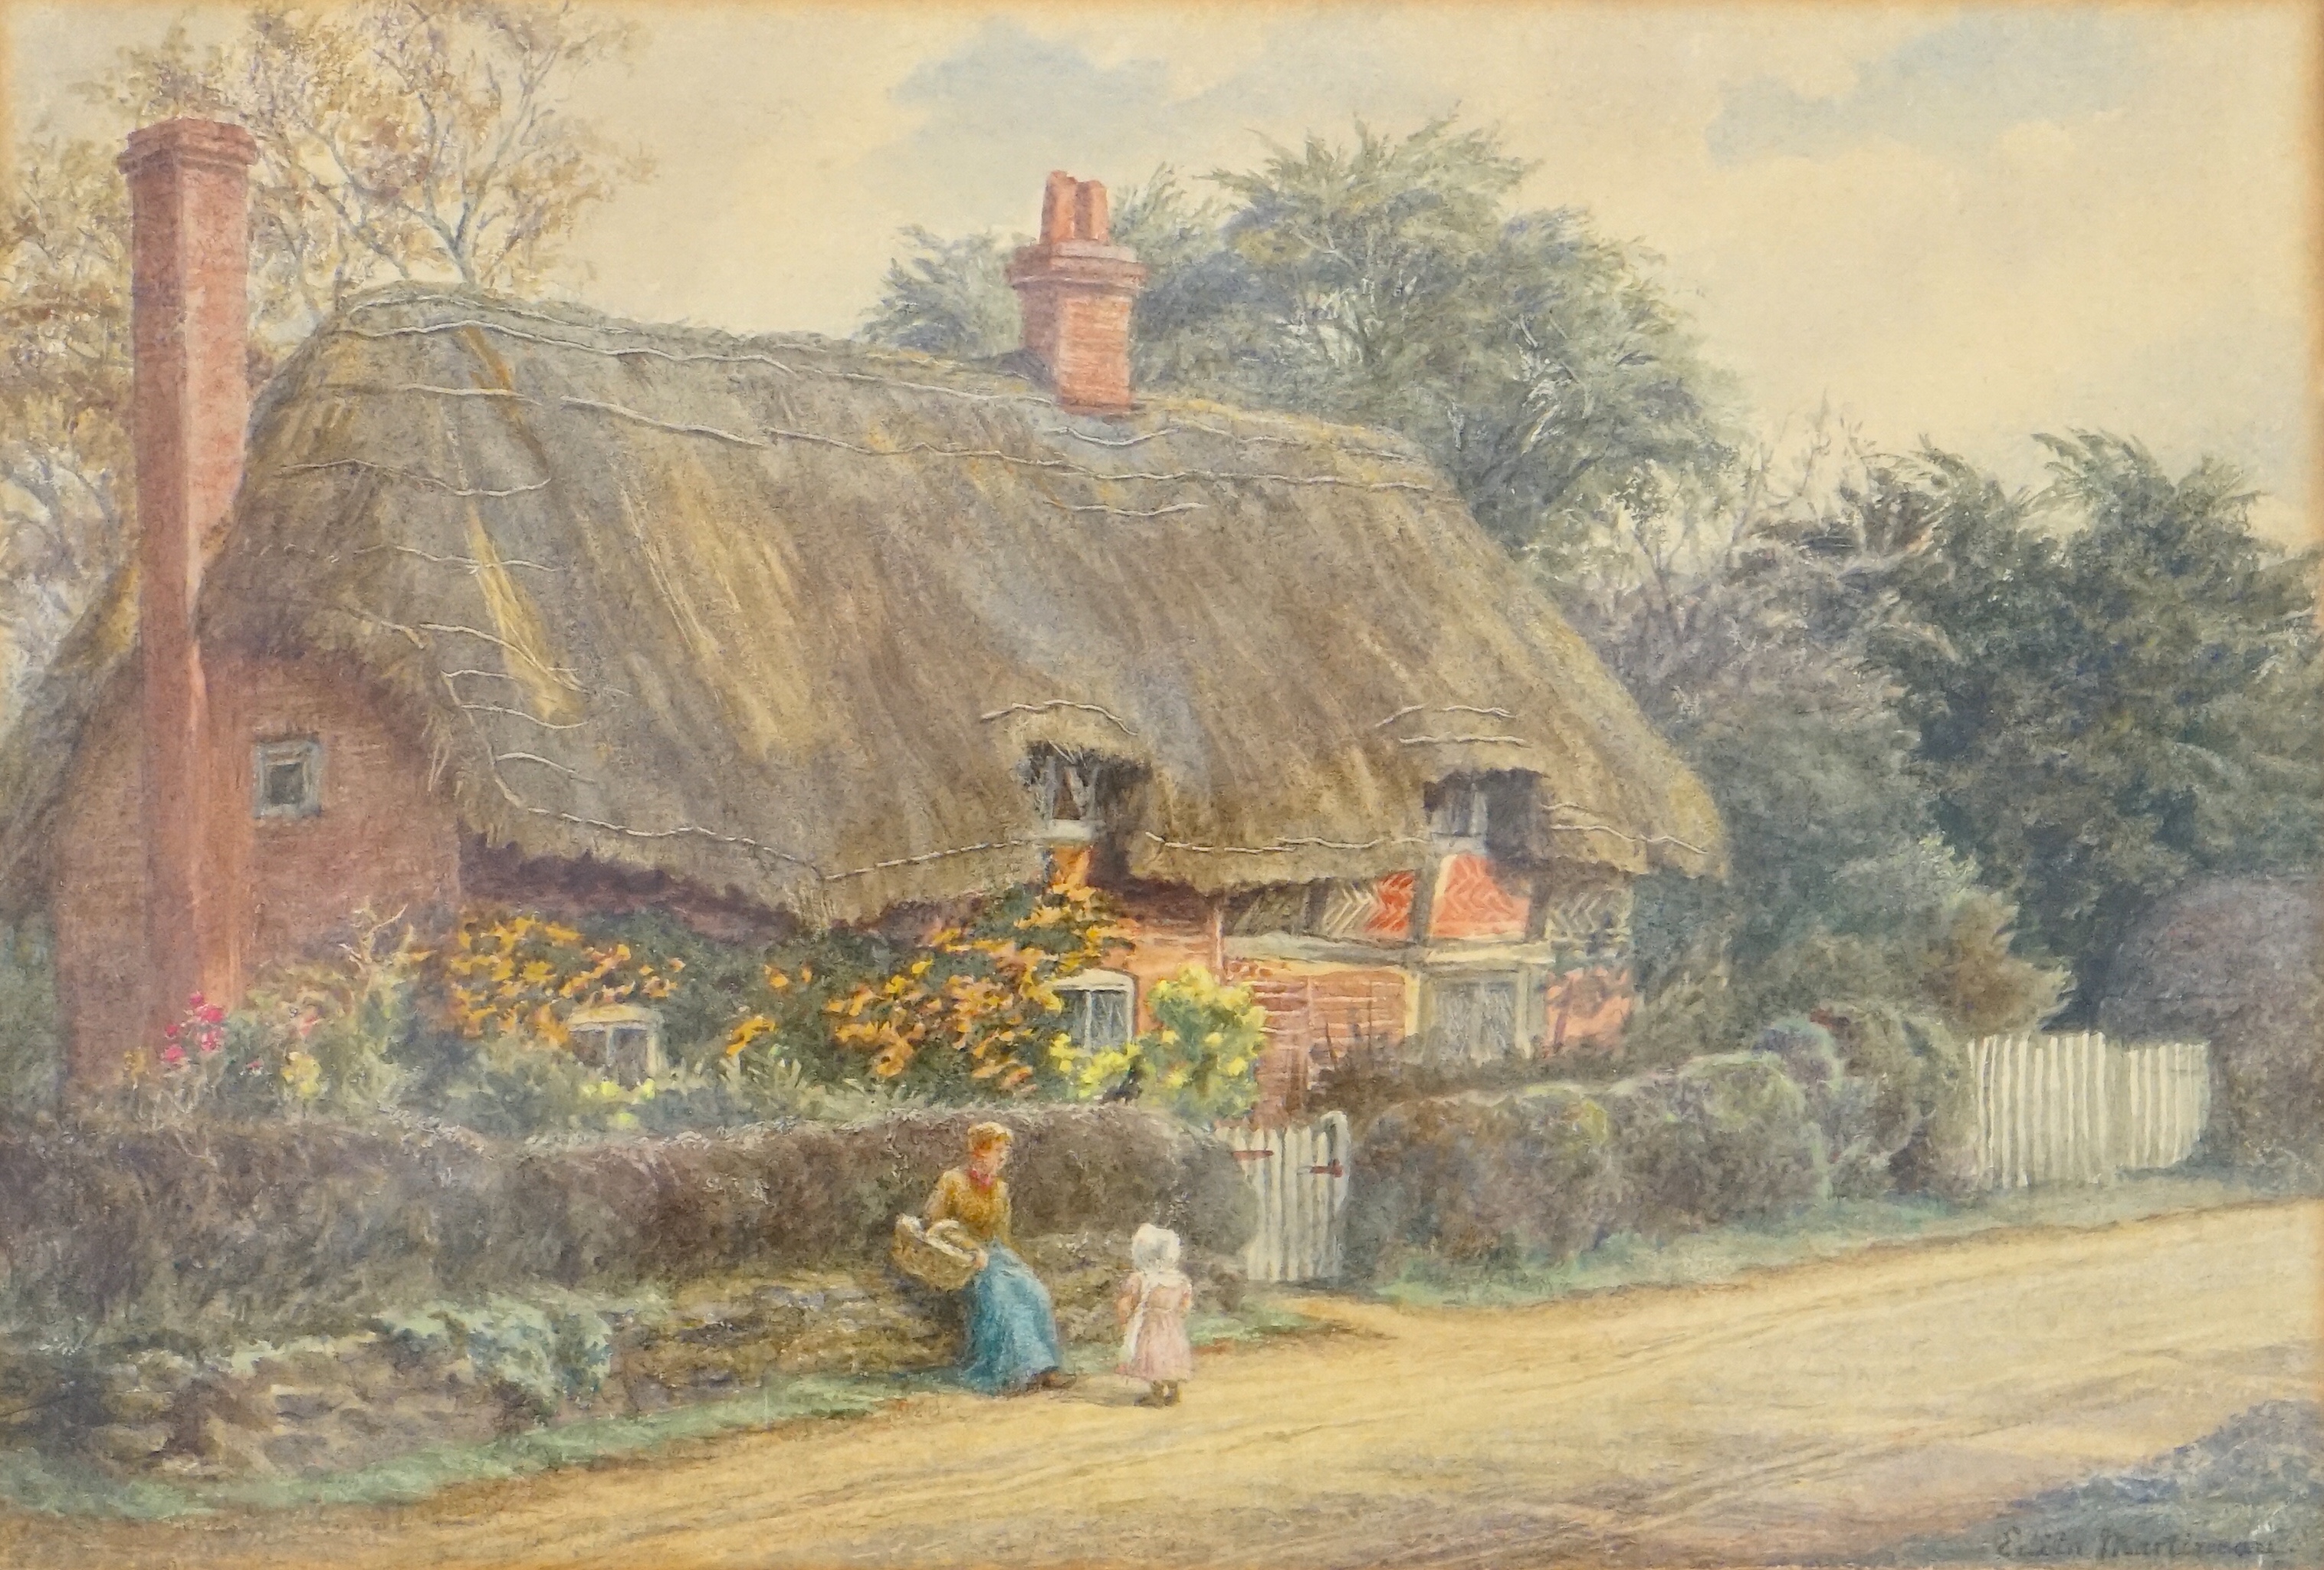 Edith Martineau (1842-1909), watercolour, Figures beside a thatched cottage, signed, 19 x 28cm